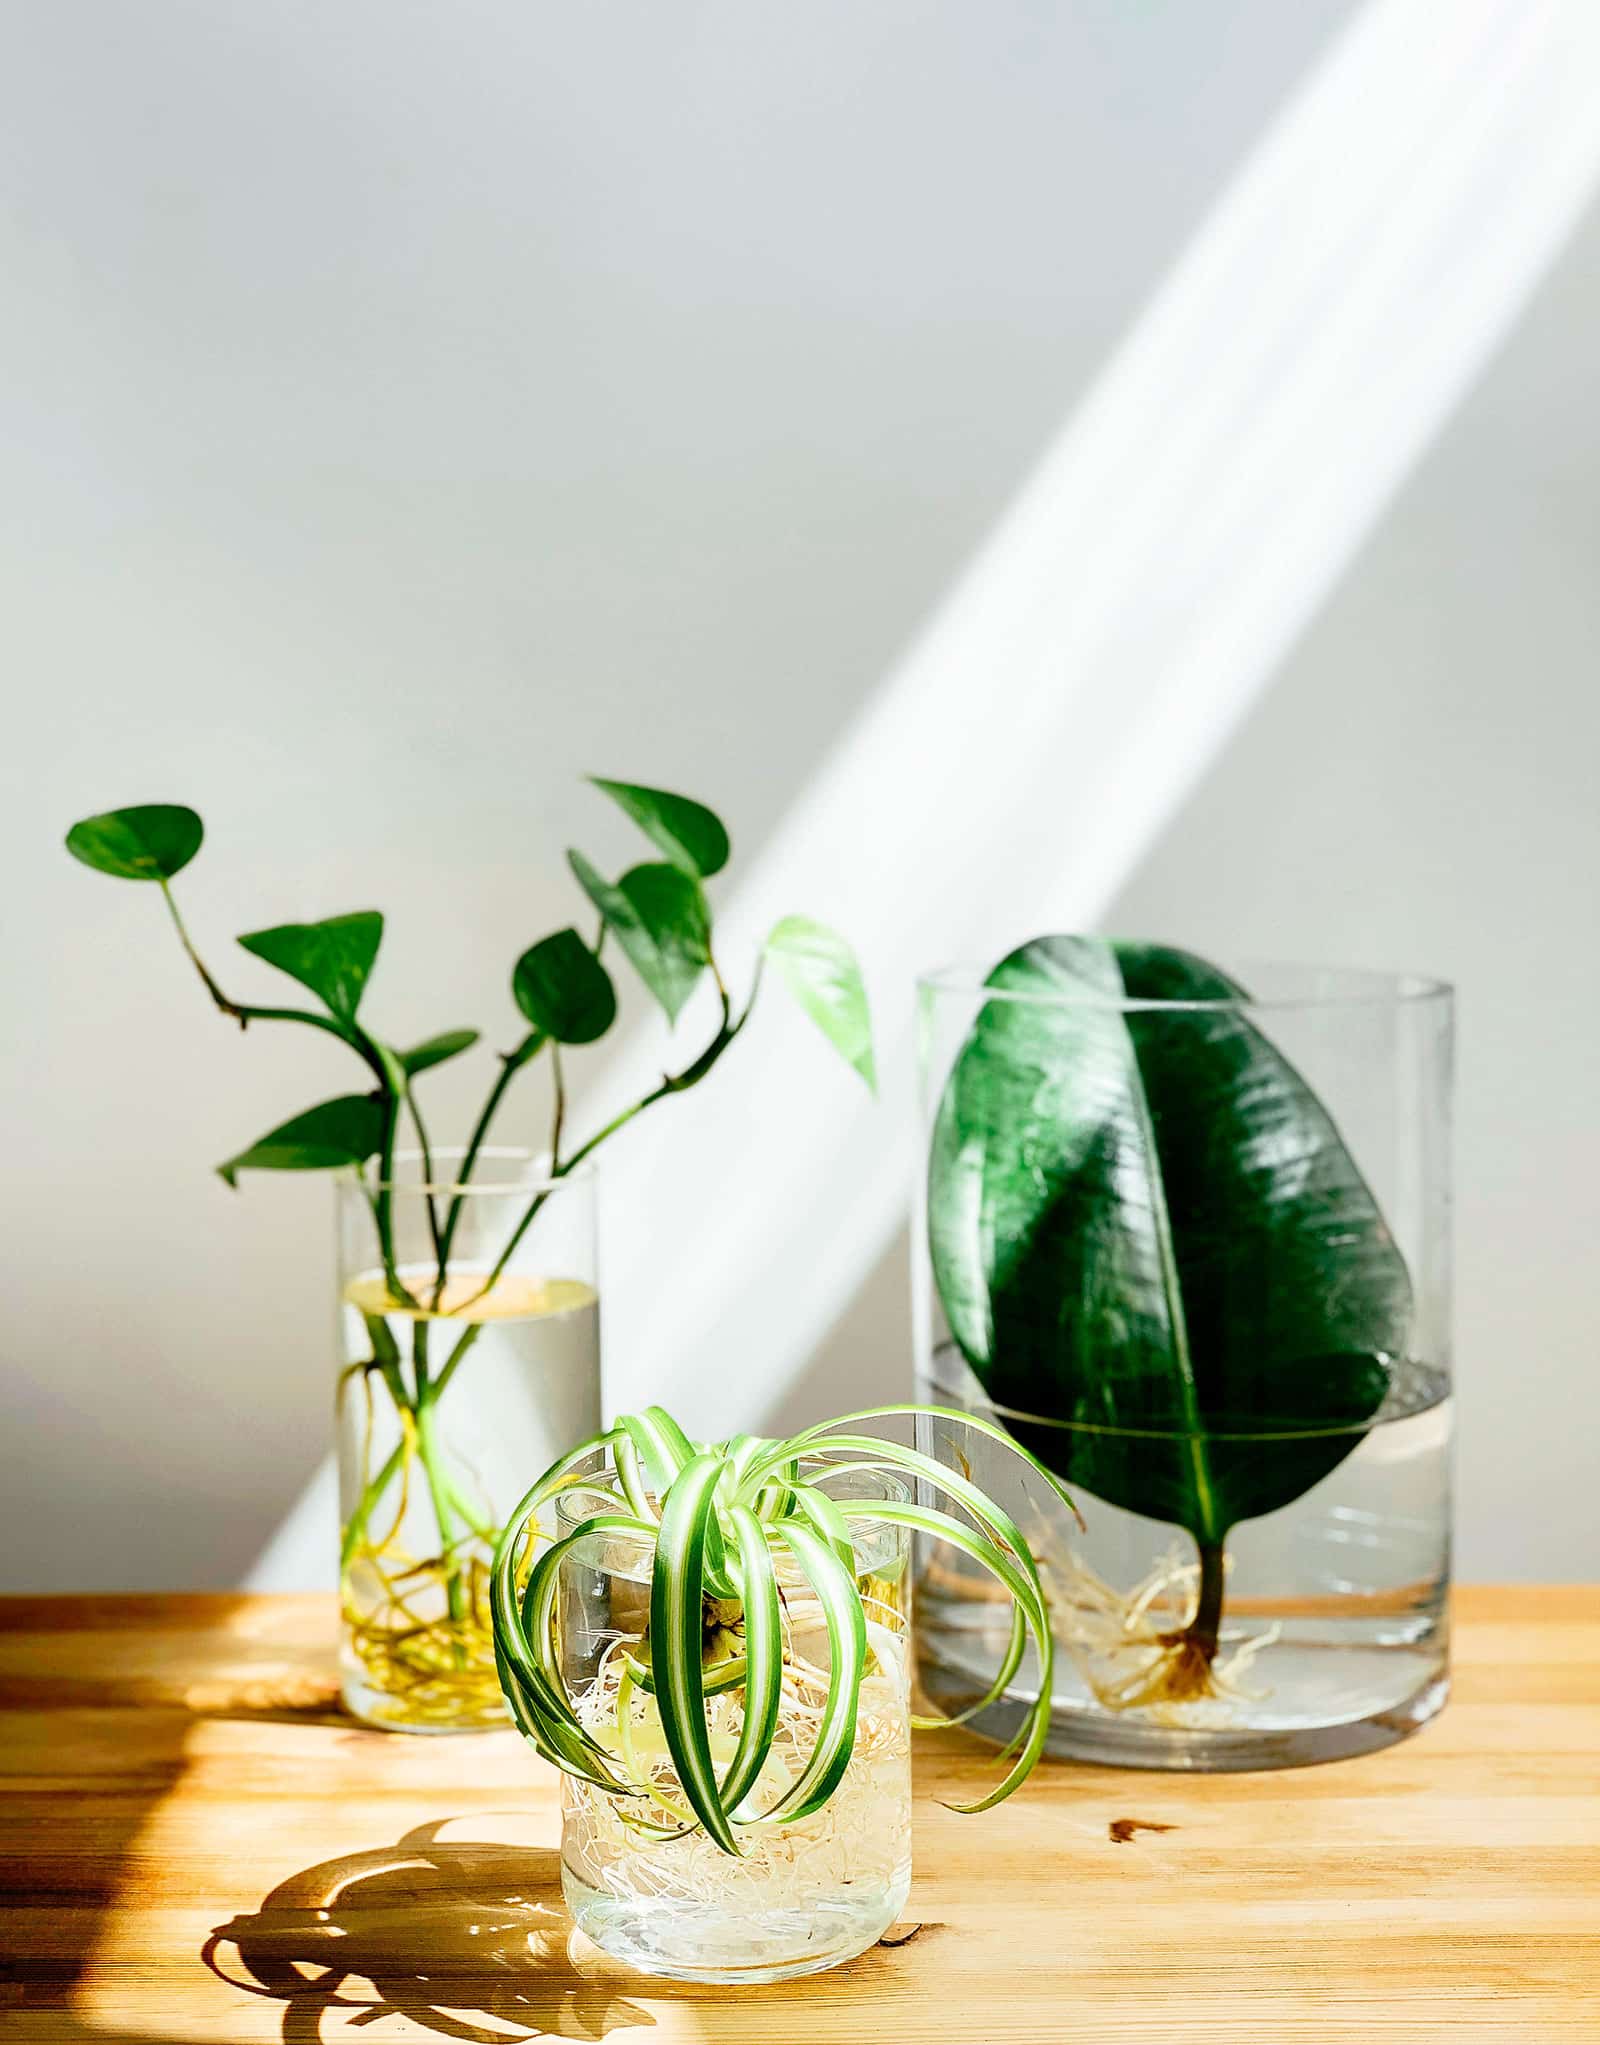 Easy beautiful plants that grow in water: no soil, no mess